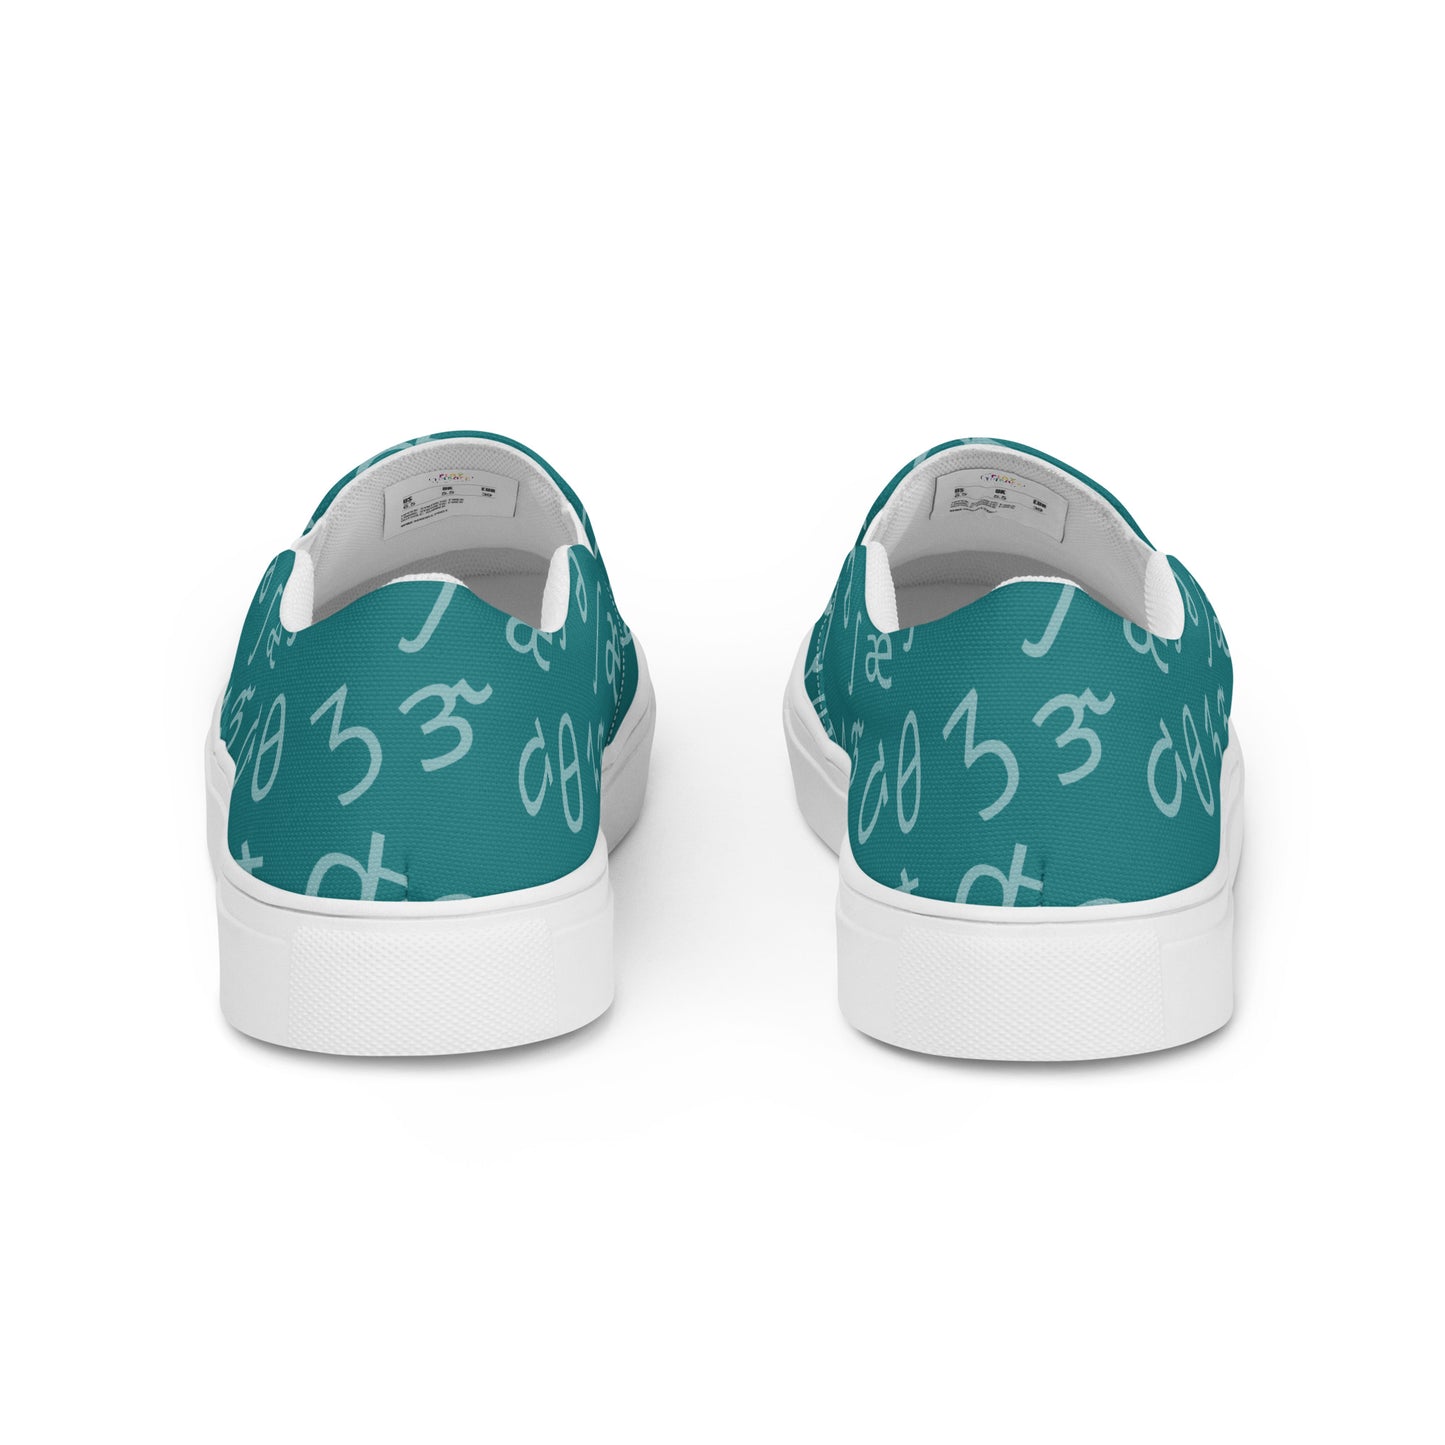 Teal IPA Slip-on Canvas Shoes (Women's Sizes)